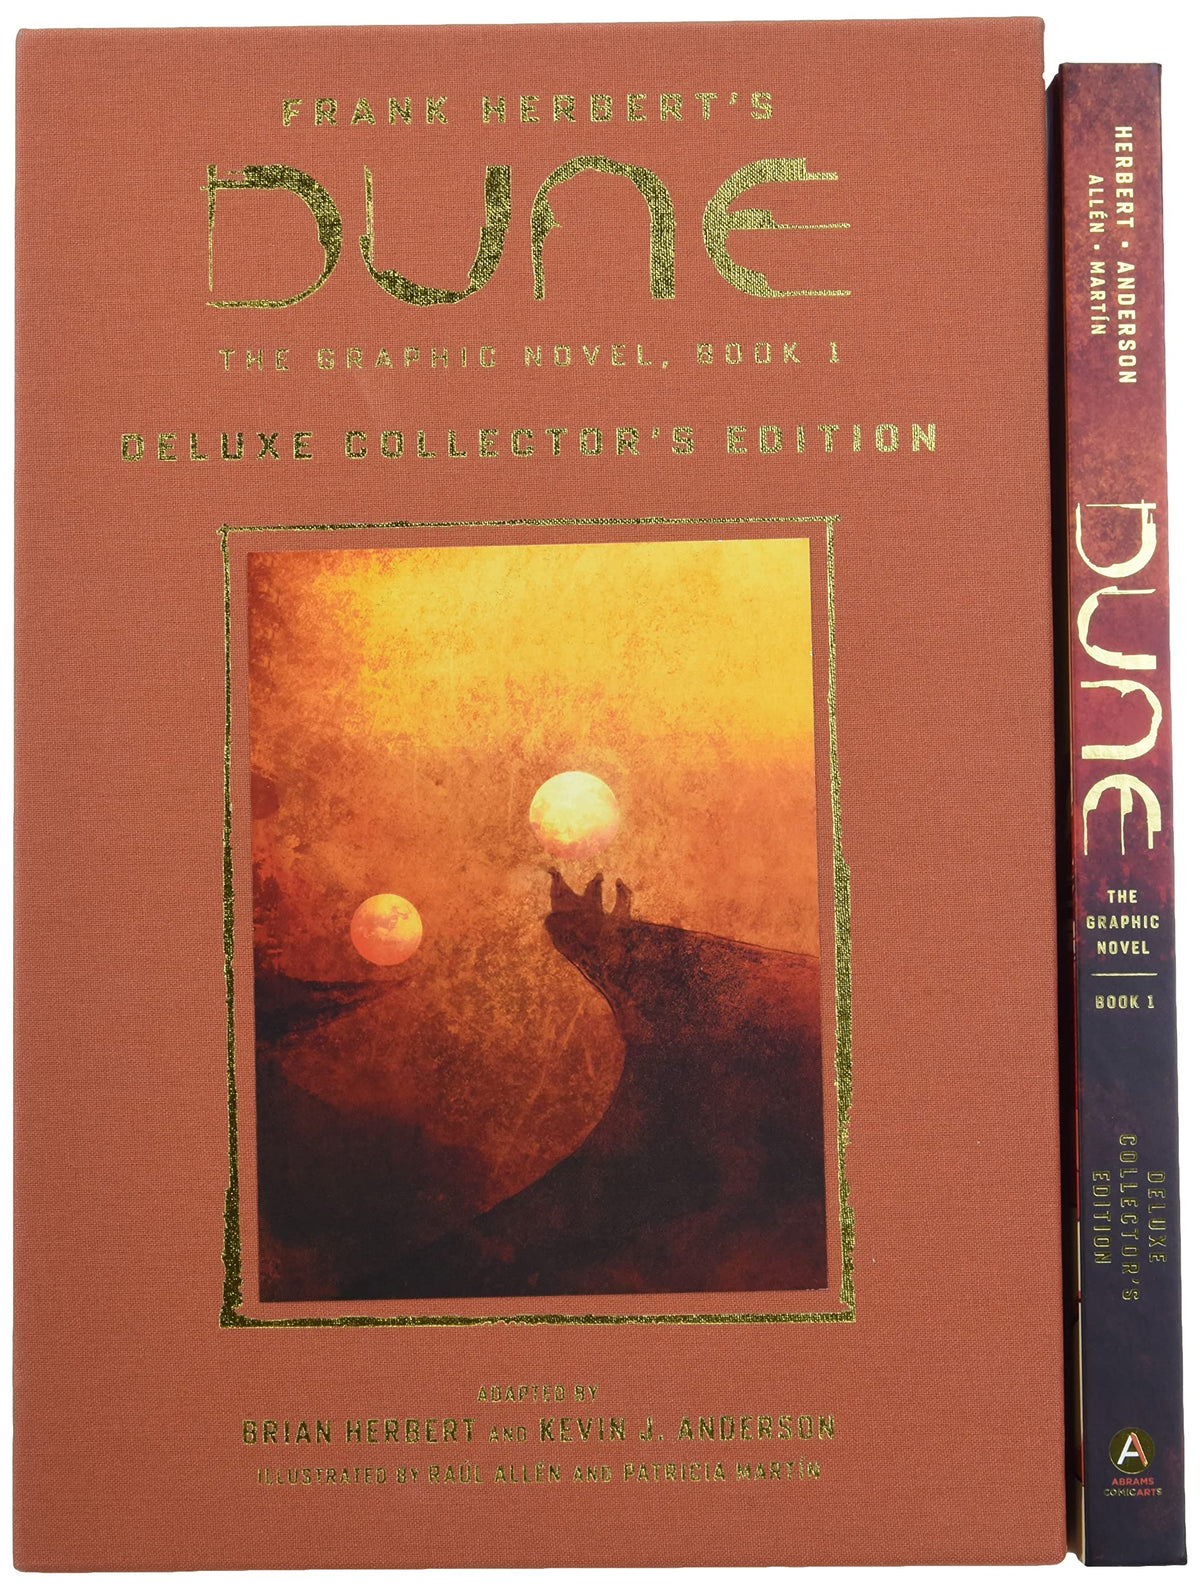 Dune: Graphic Novel Vol. 1 - Deluxe Collector's Edition HC - Third Eye